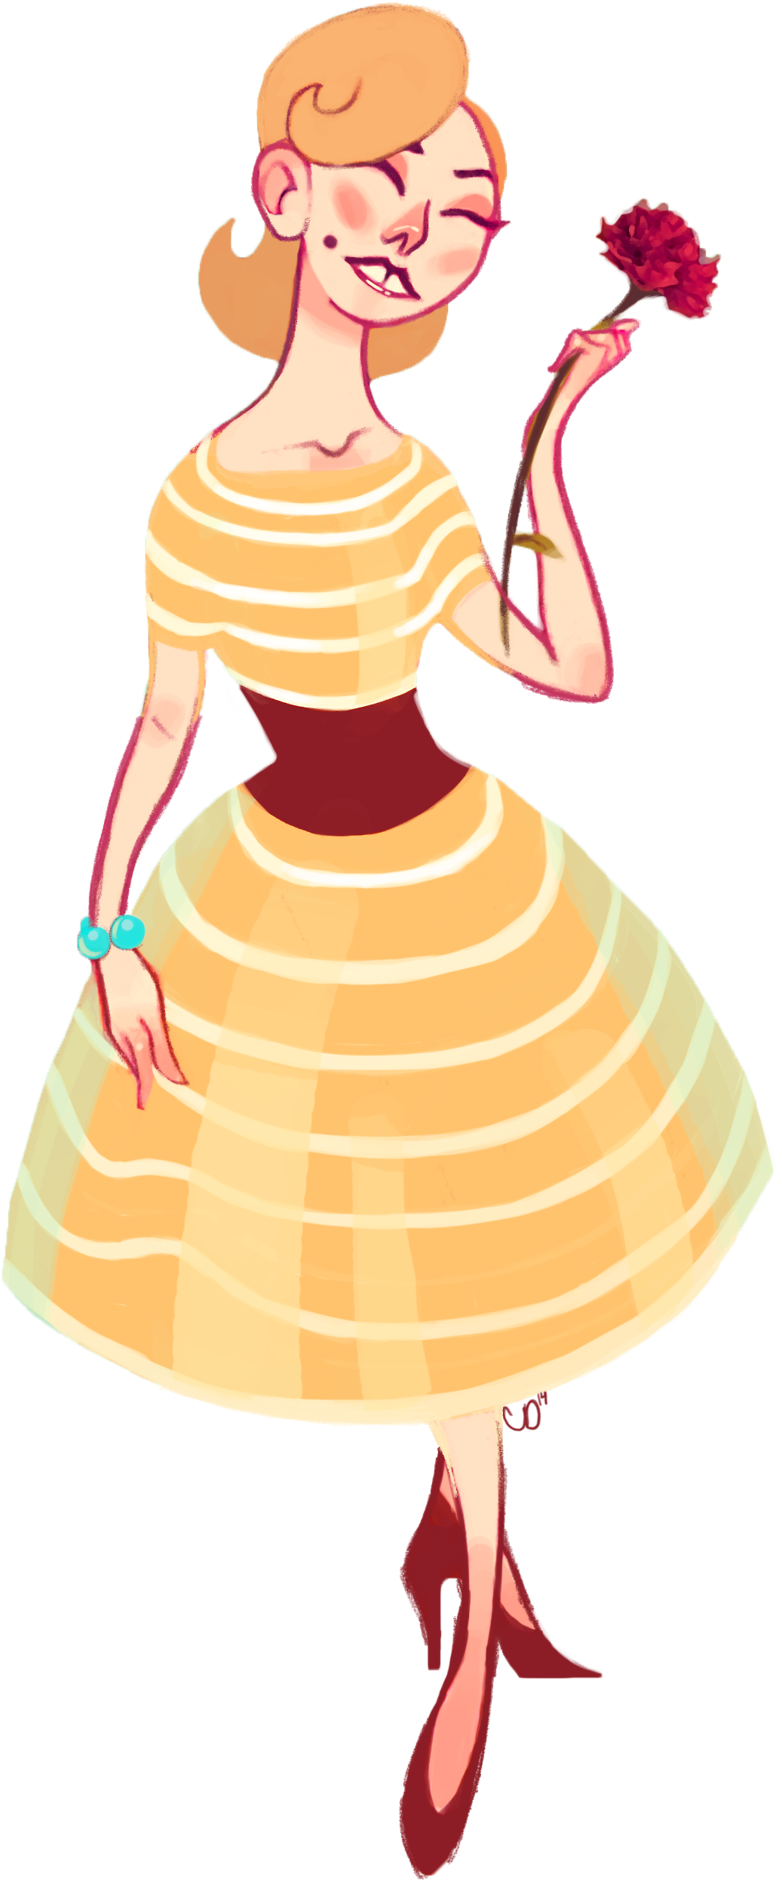 Original Characters Based Off Of A Caddy Vintage Housewife - Original Characters Based Off Of A Caddy Vintage Housewife (847x1920)